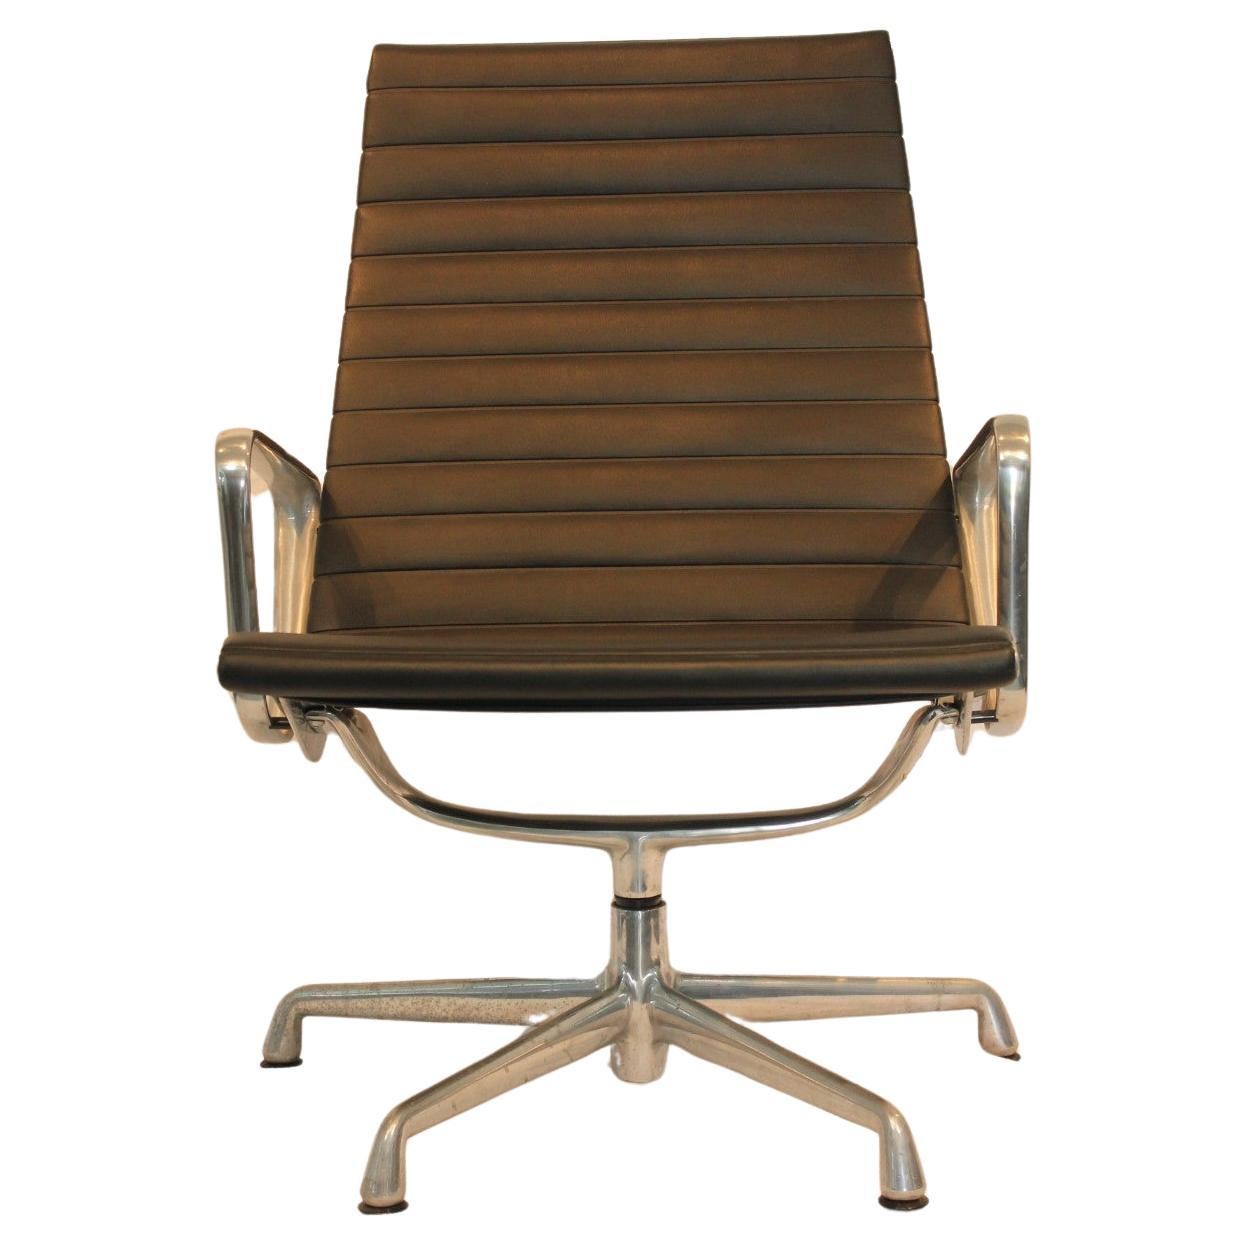 Herman Miller Eames Aluminum Lounge Chair Mid 20th Century Modern Circa 1970 For Sale